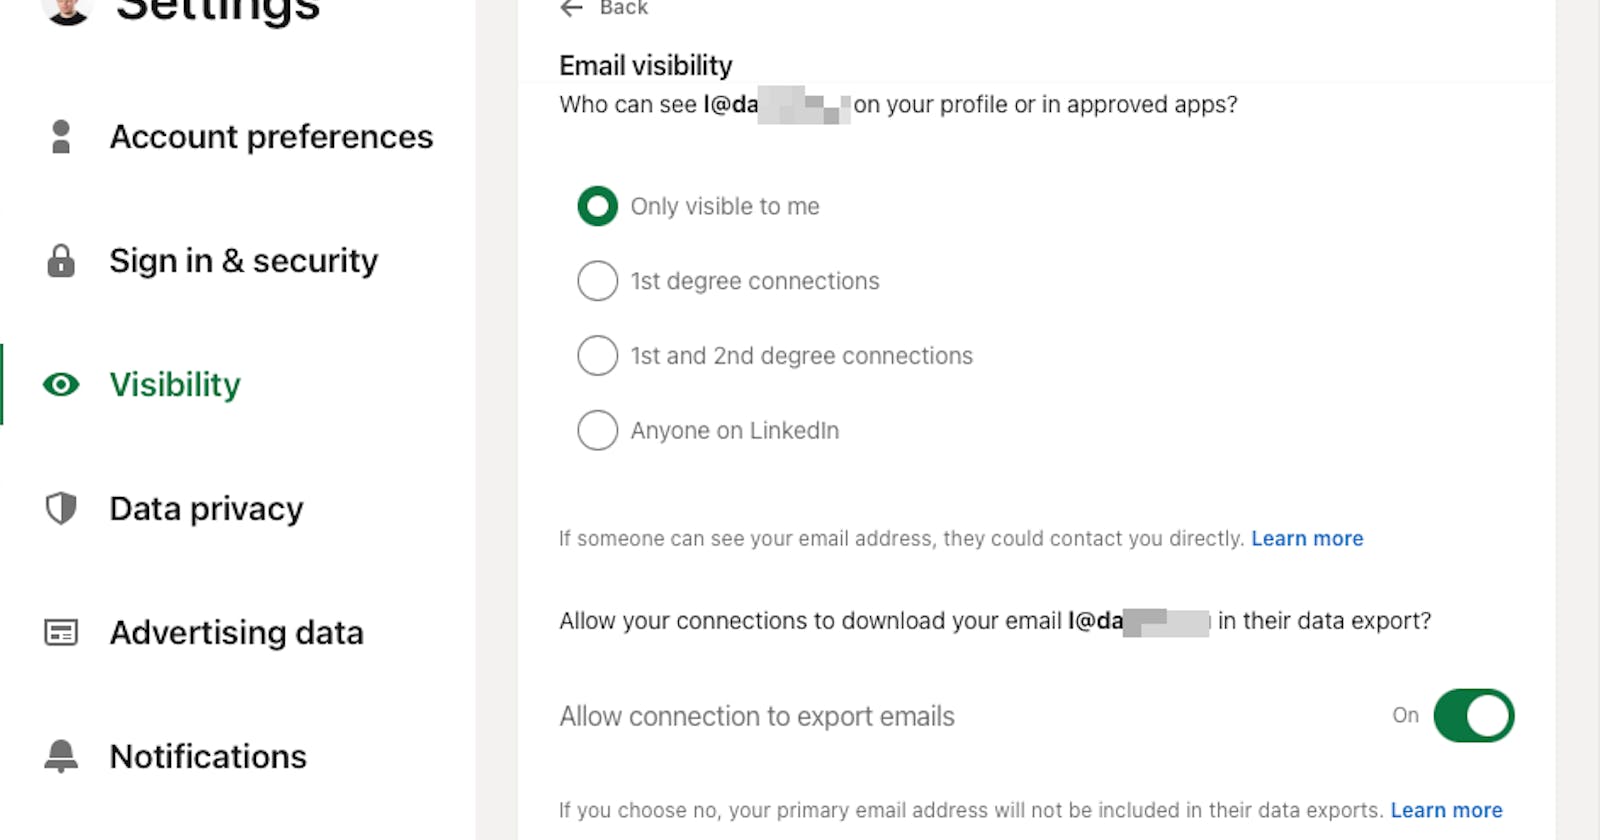 How to hide your email address on LinkedIn